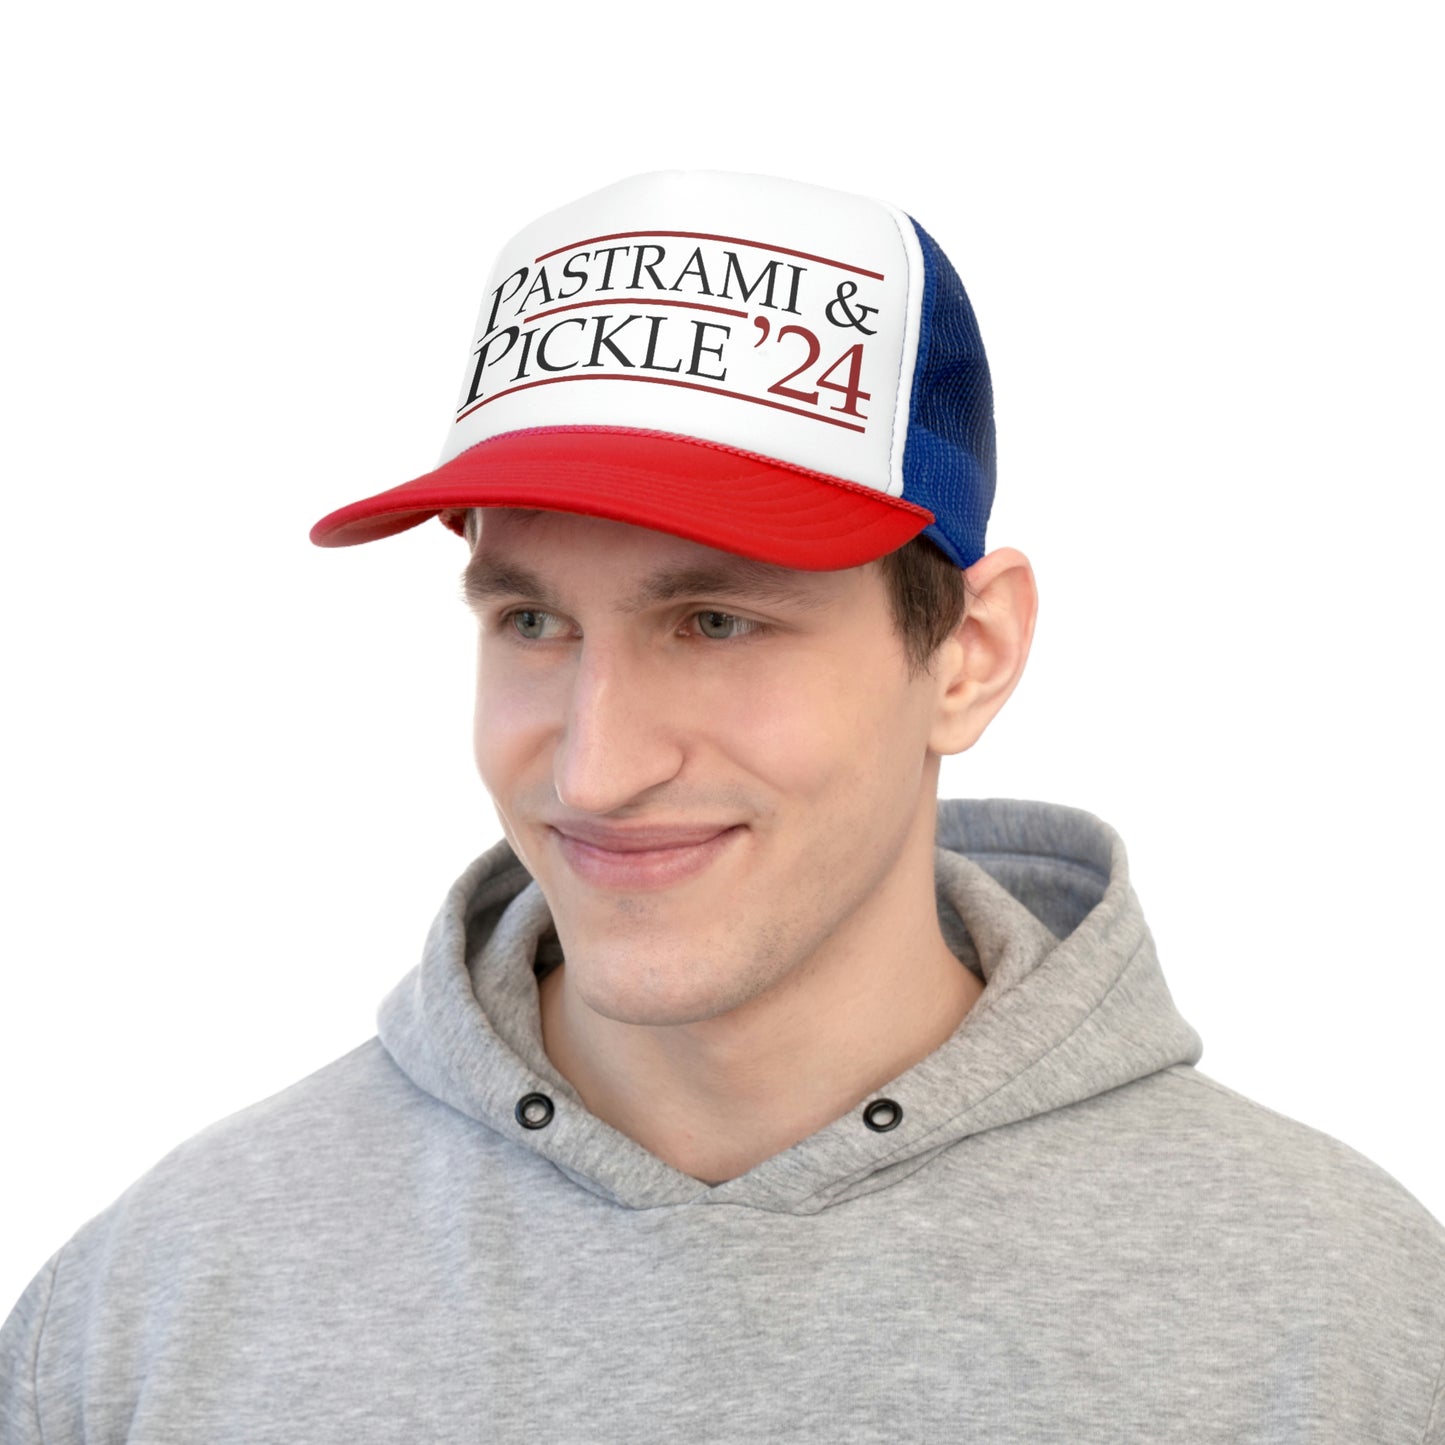 Pastrami and Pickle Bar Pizza Hat